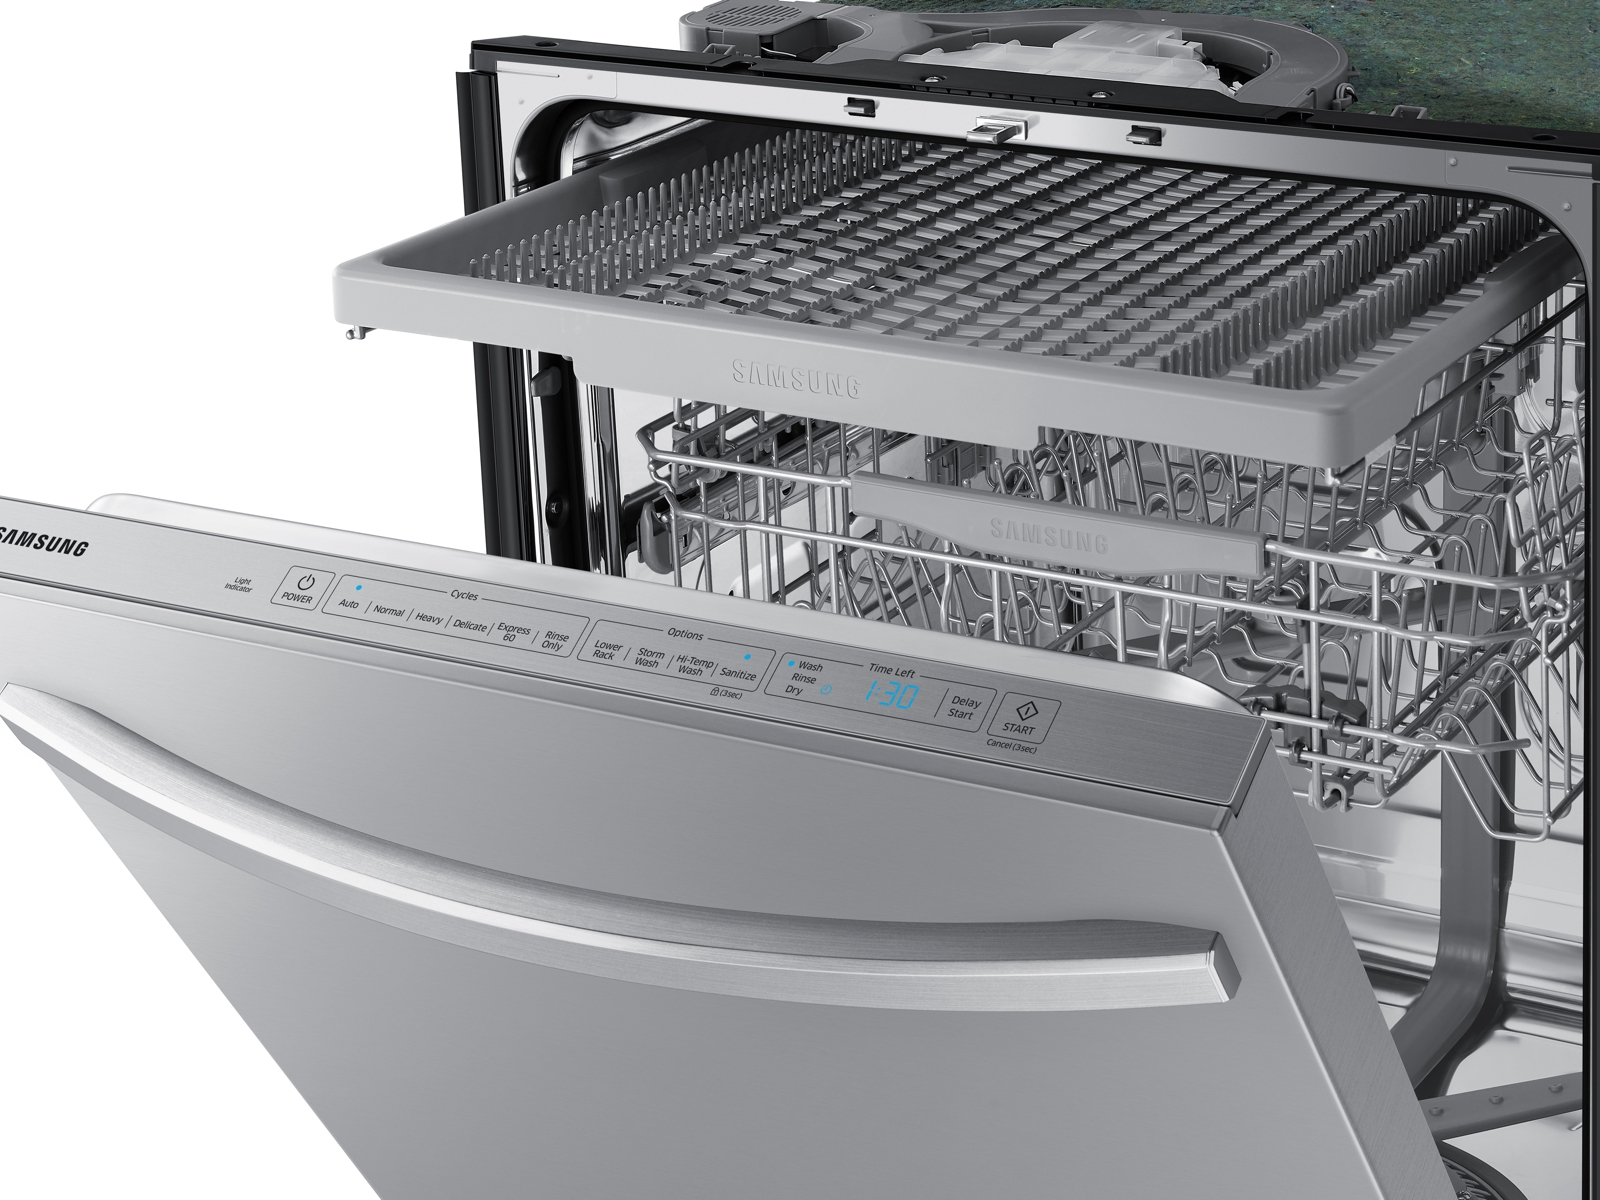 Dishwashers on sale (21 products) find prices here »